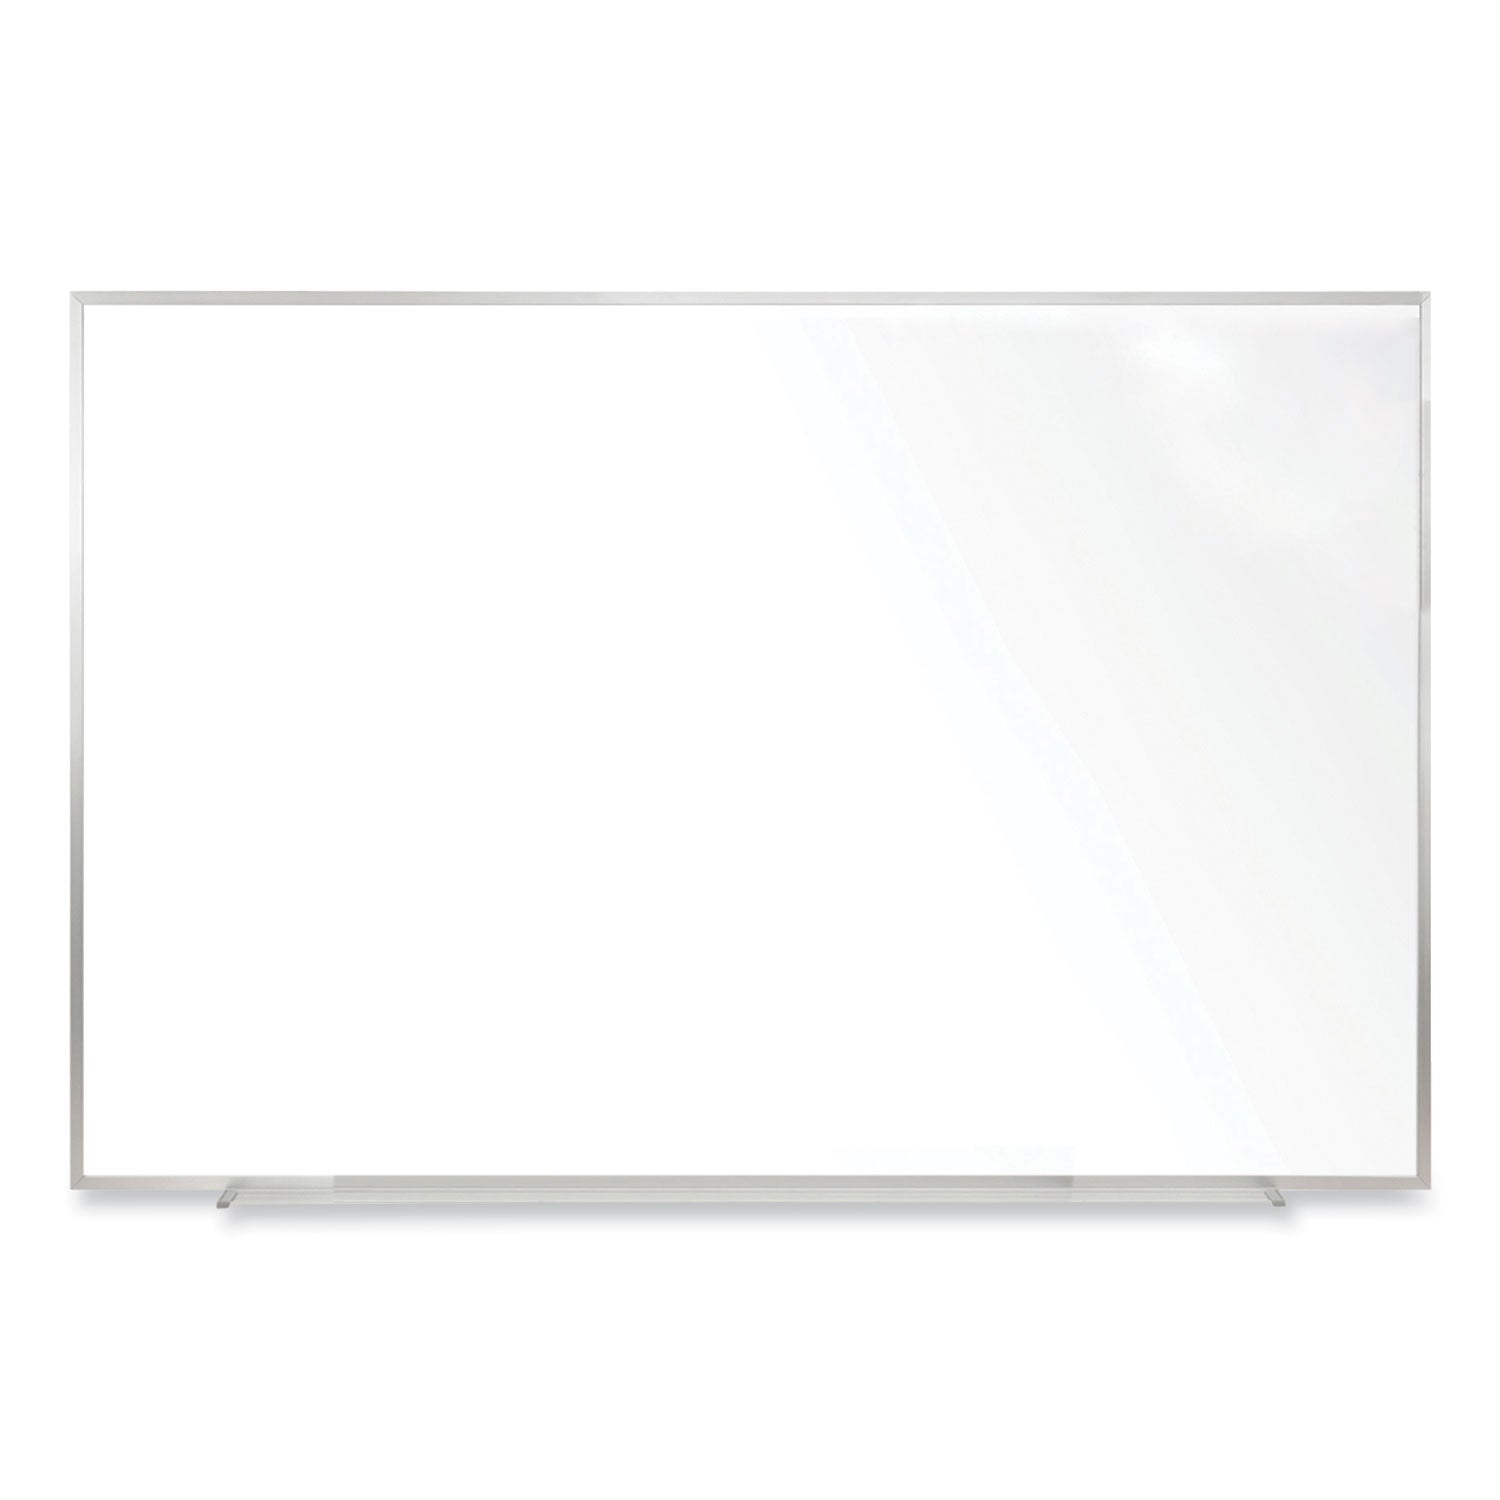 non-magnetic-whiteboard-with-aluminum-frame-4863-x-4847-white-surface-satin-aluminum-frame-ships-in-7-10-business-days_ghem2444 - 1